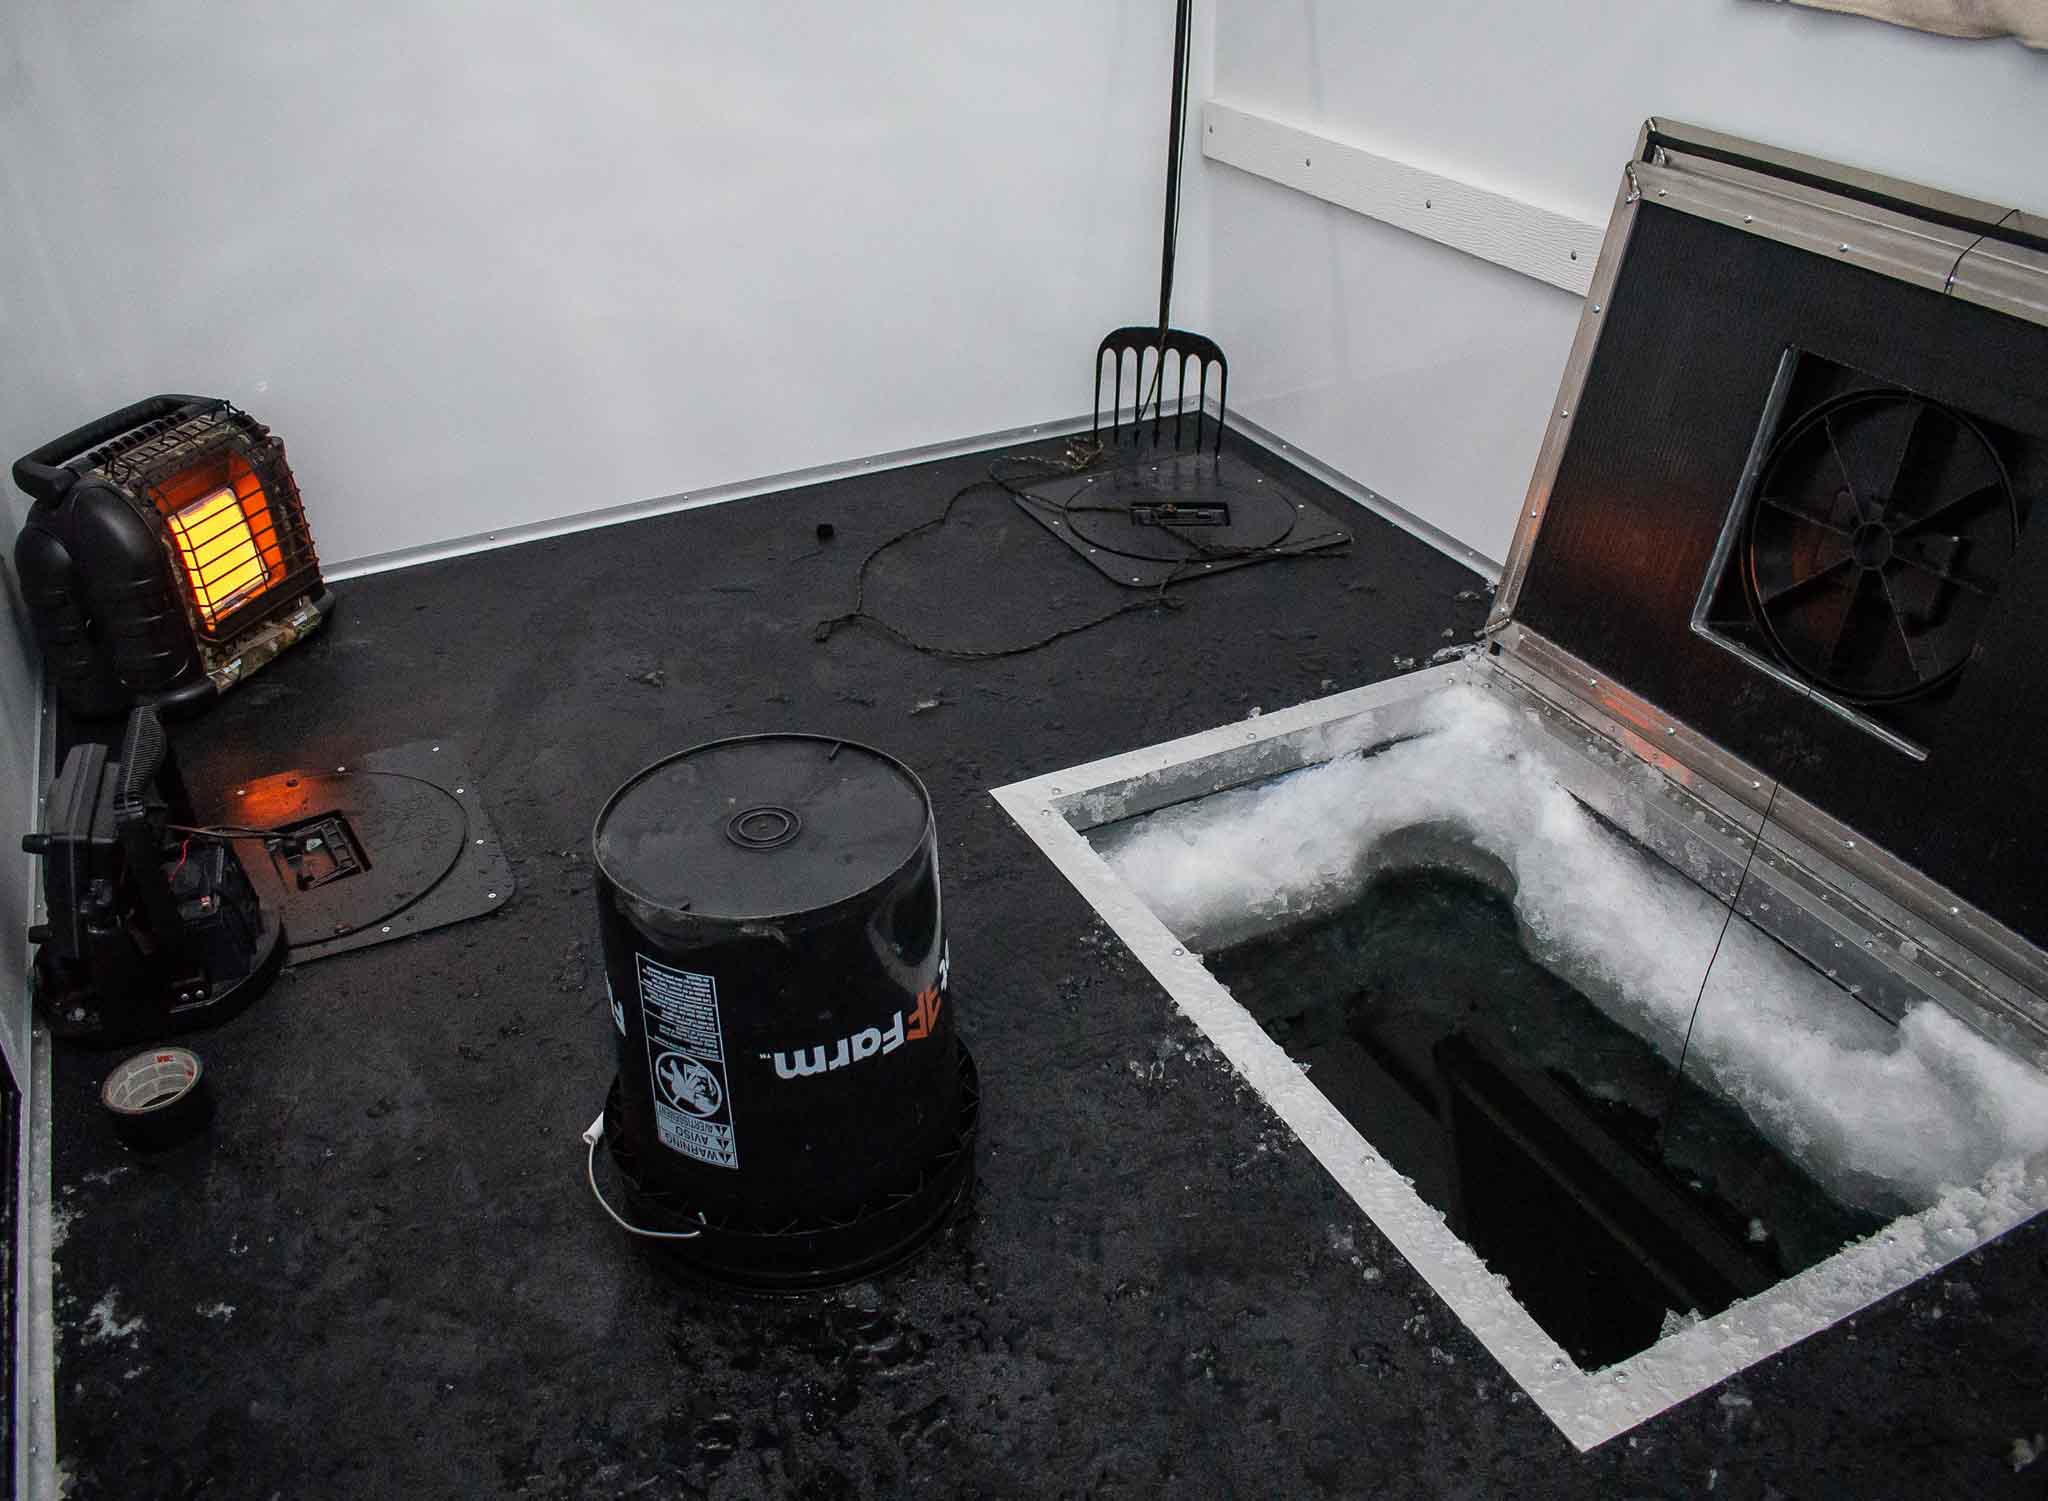 interior of dark house - tips for spearfishing on ice